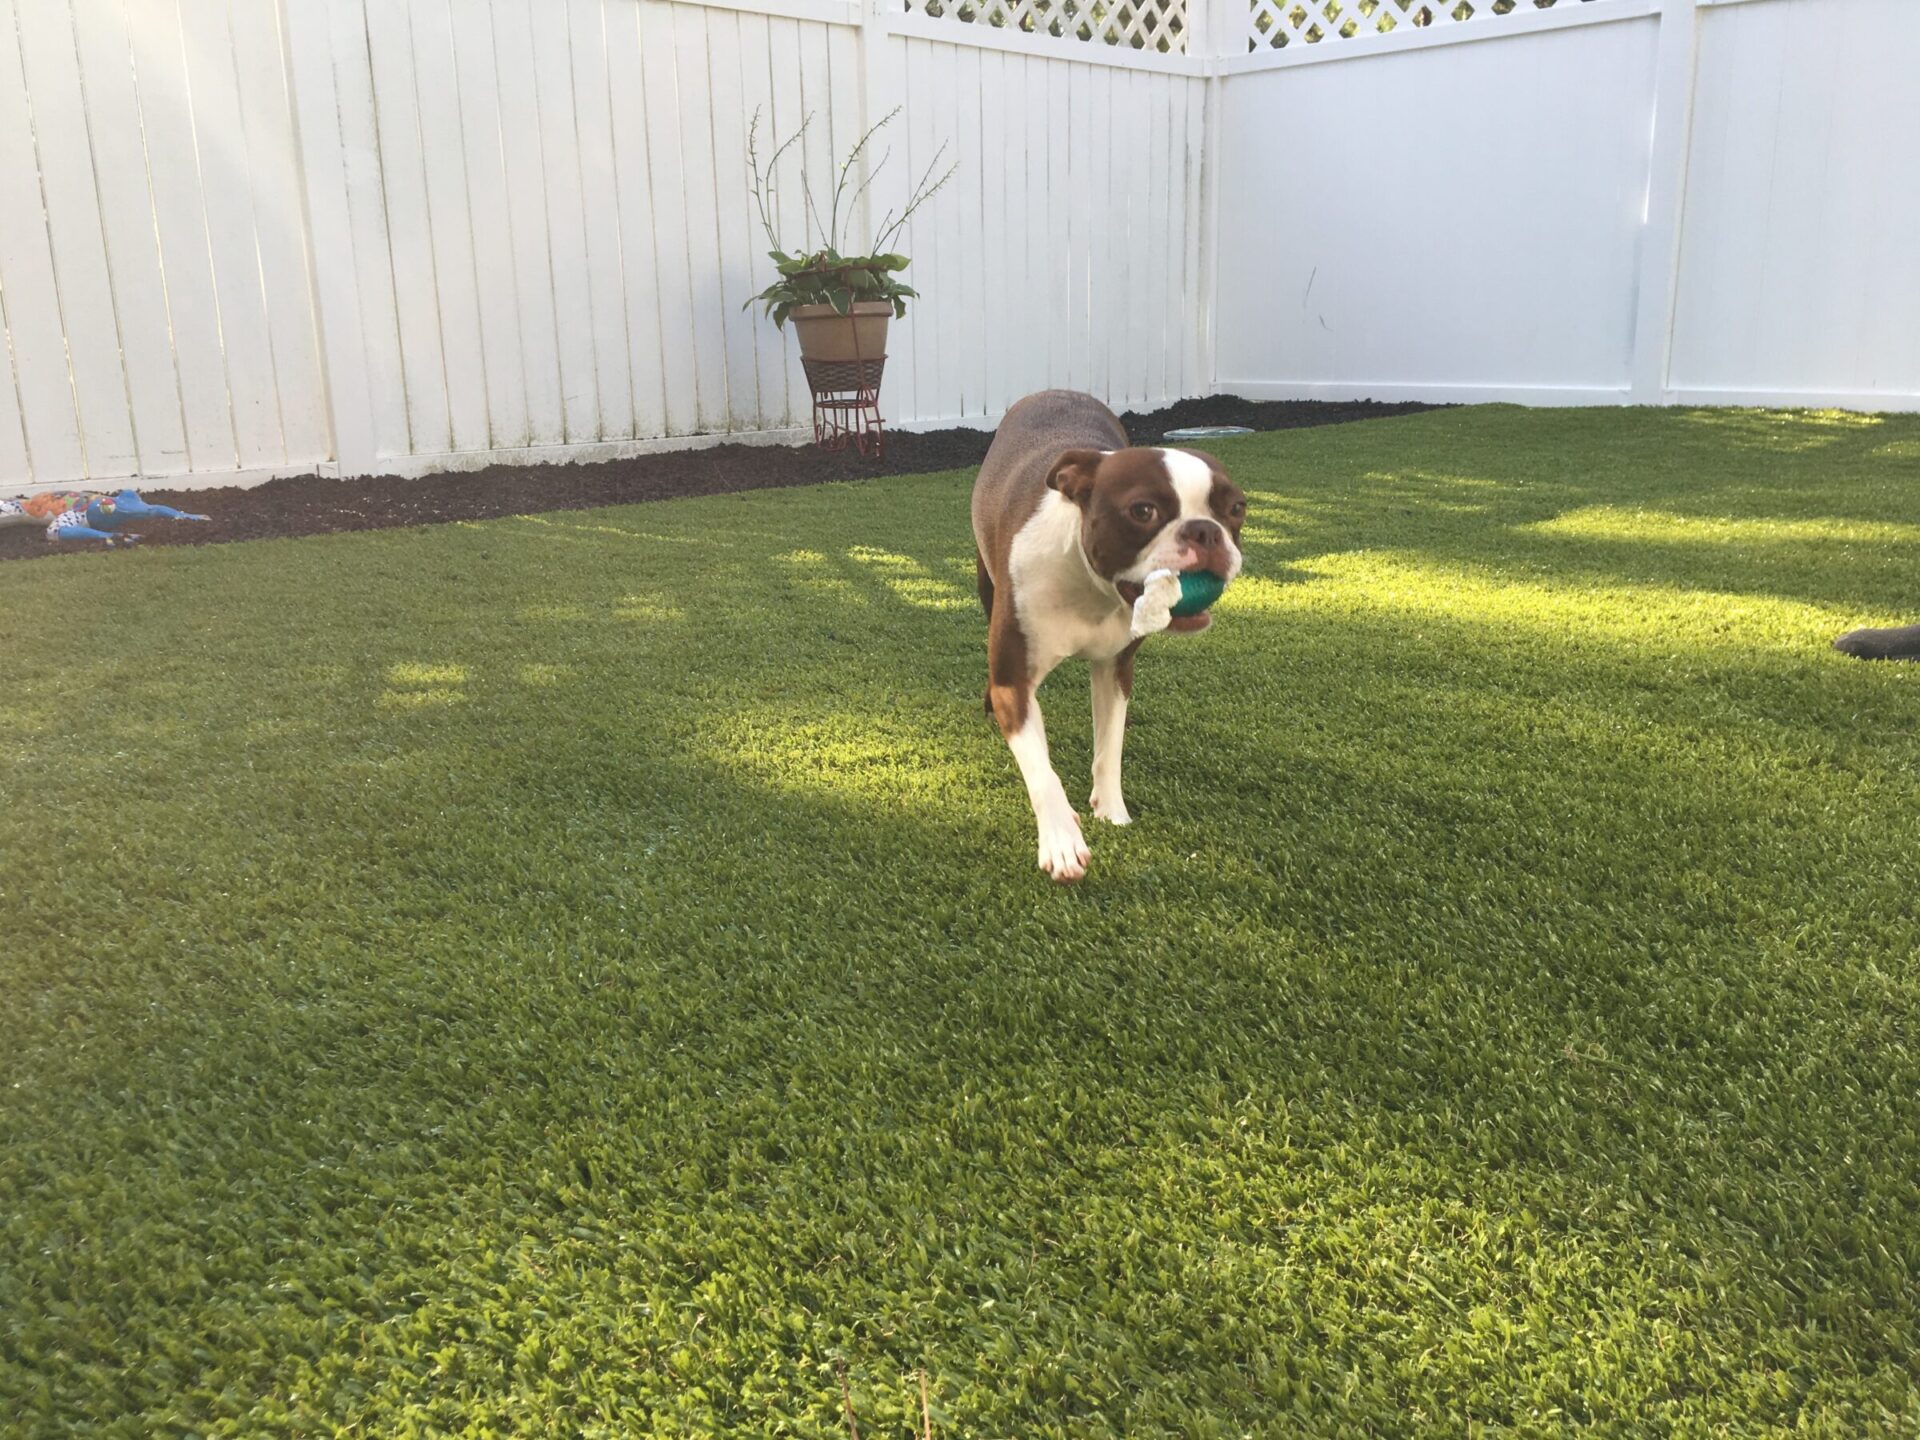 A brown and white dog is running across a neatly maintained green lawn, carrying a blue object, with a white fence and plants in the background.